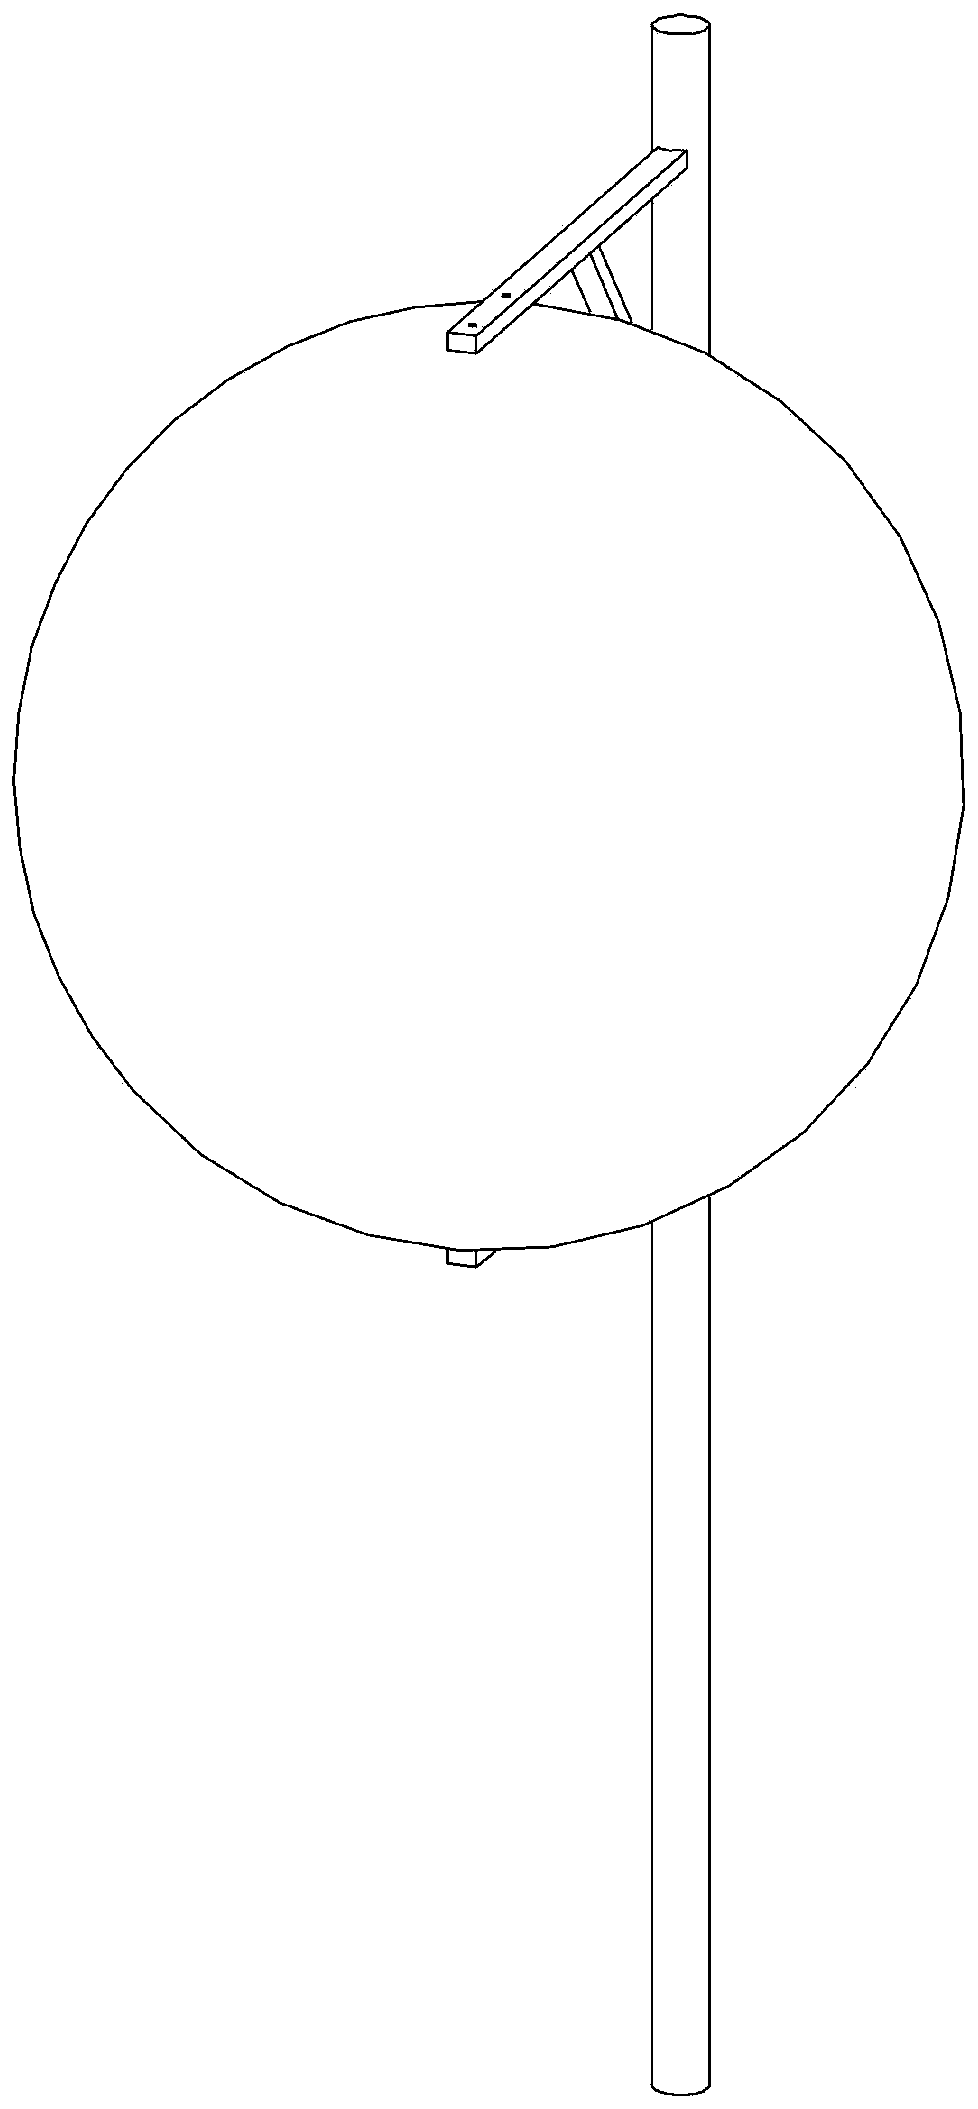 Luneberg lens antenna with movable feed source